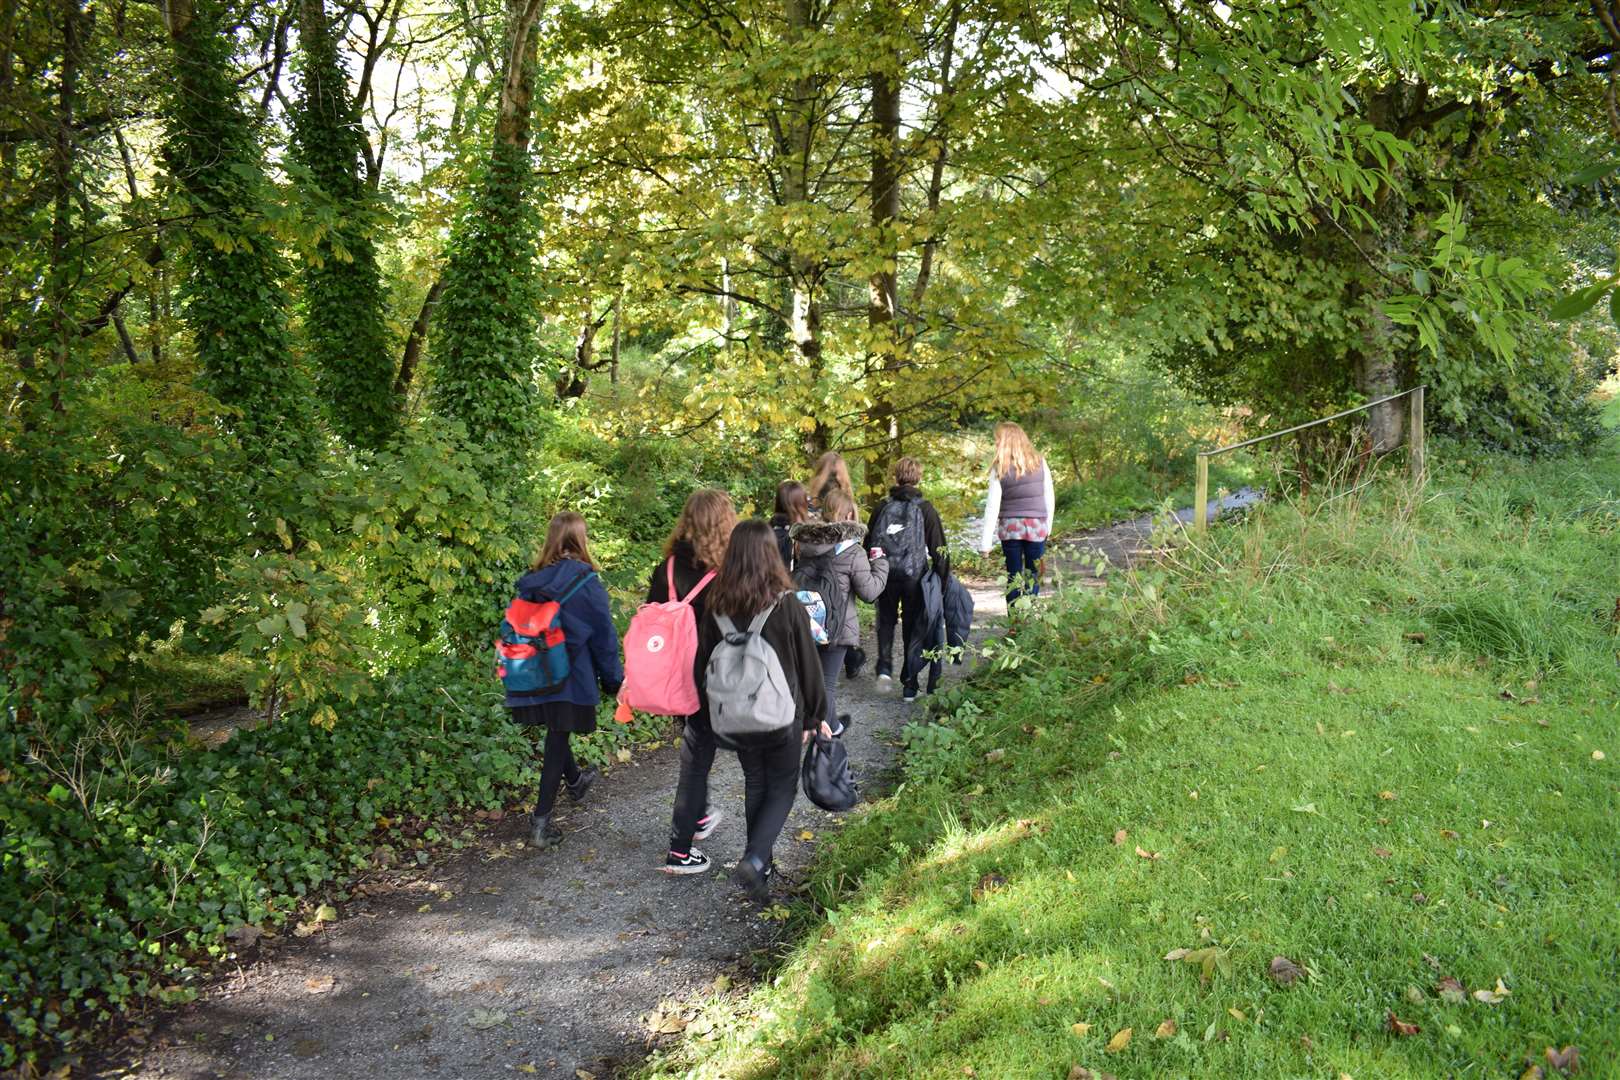 It is hoped to roll out the youth walking scheme to all high schools in Moray.